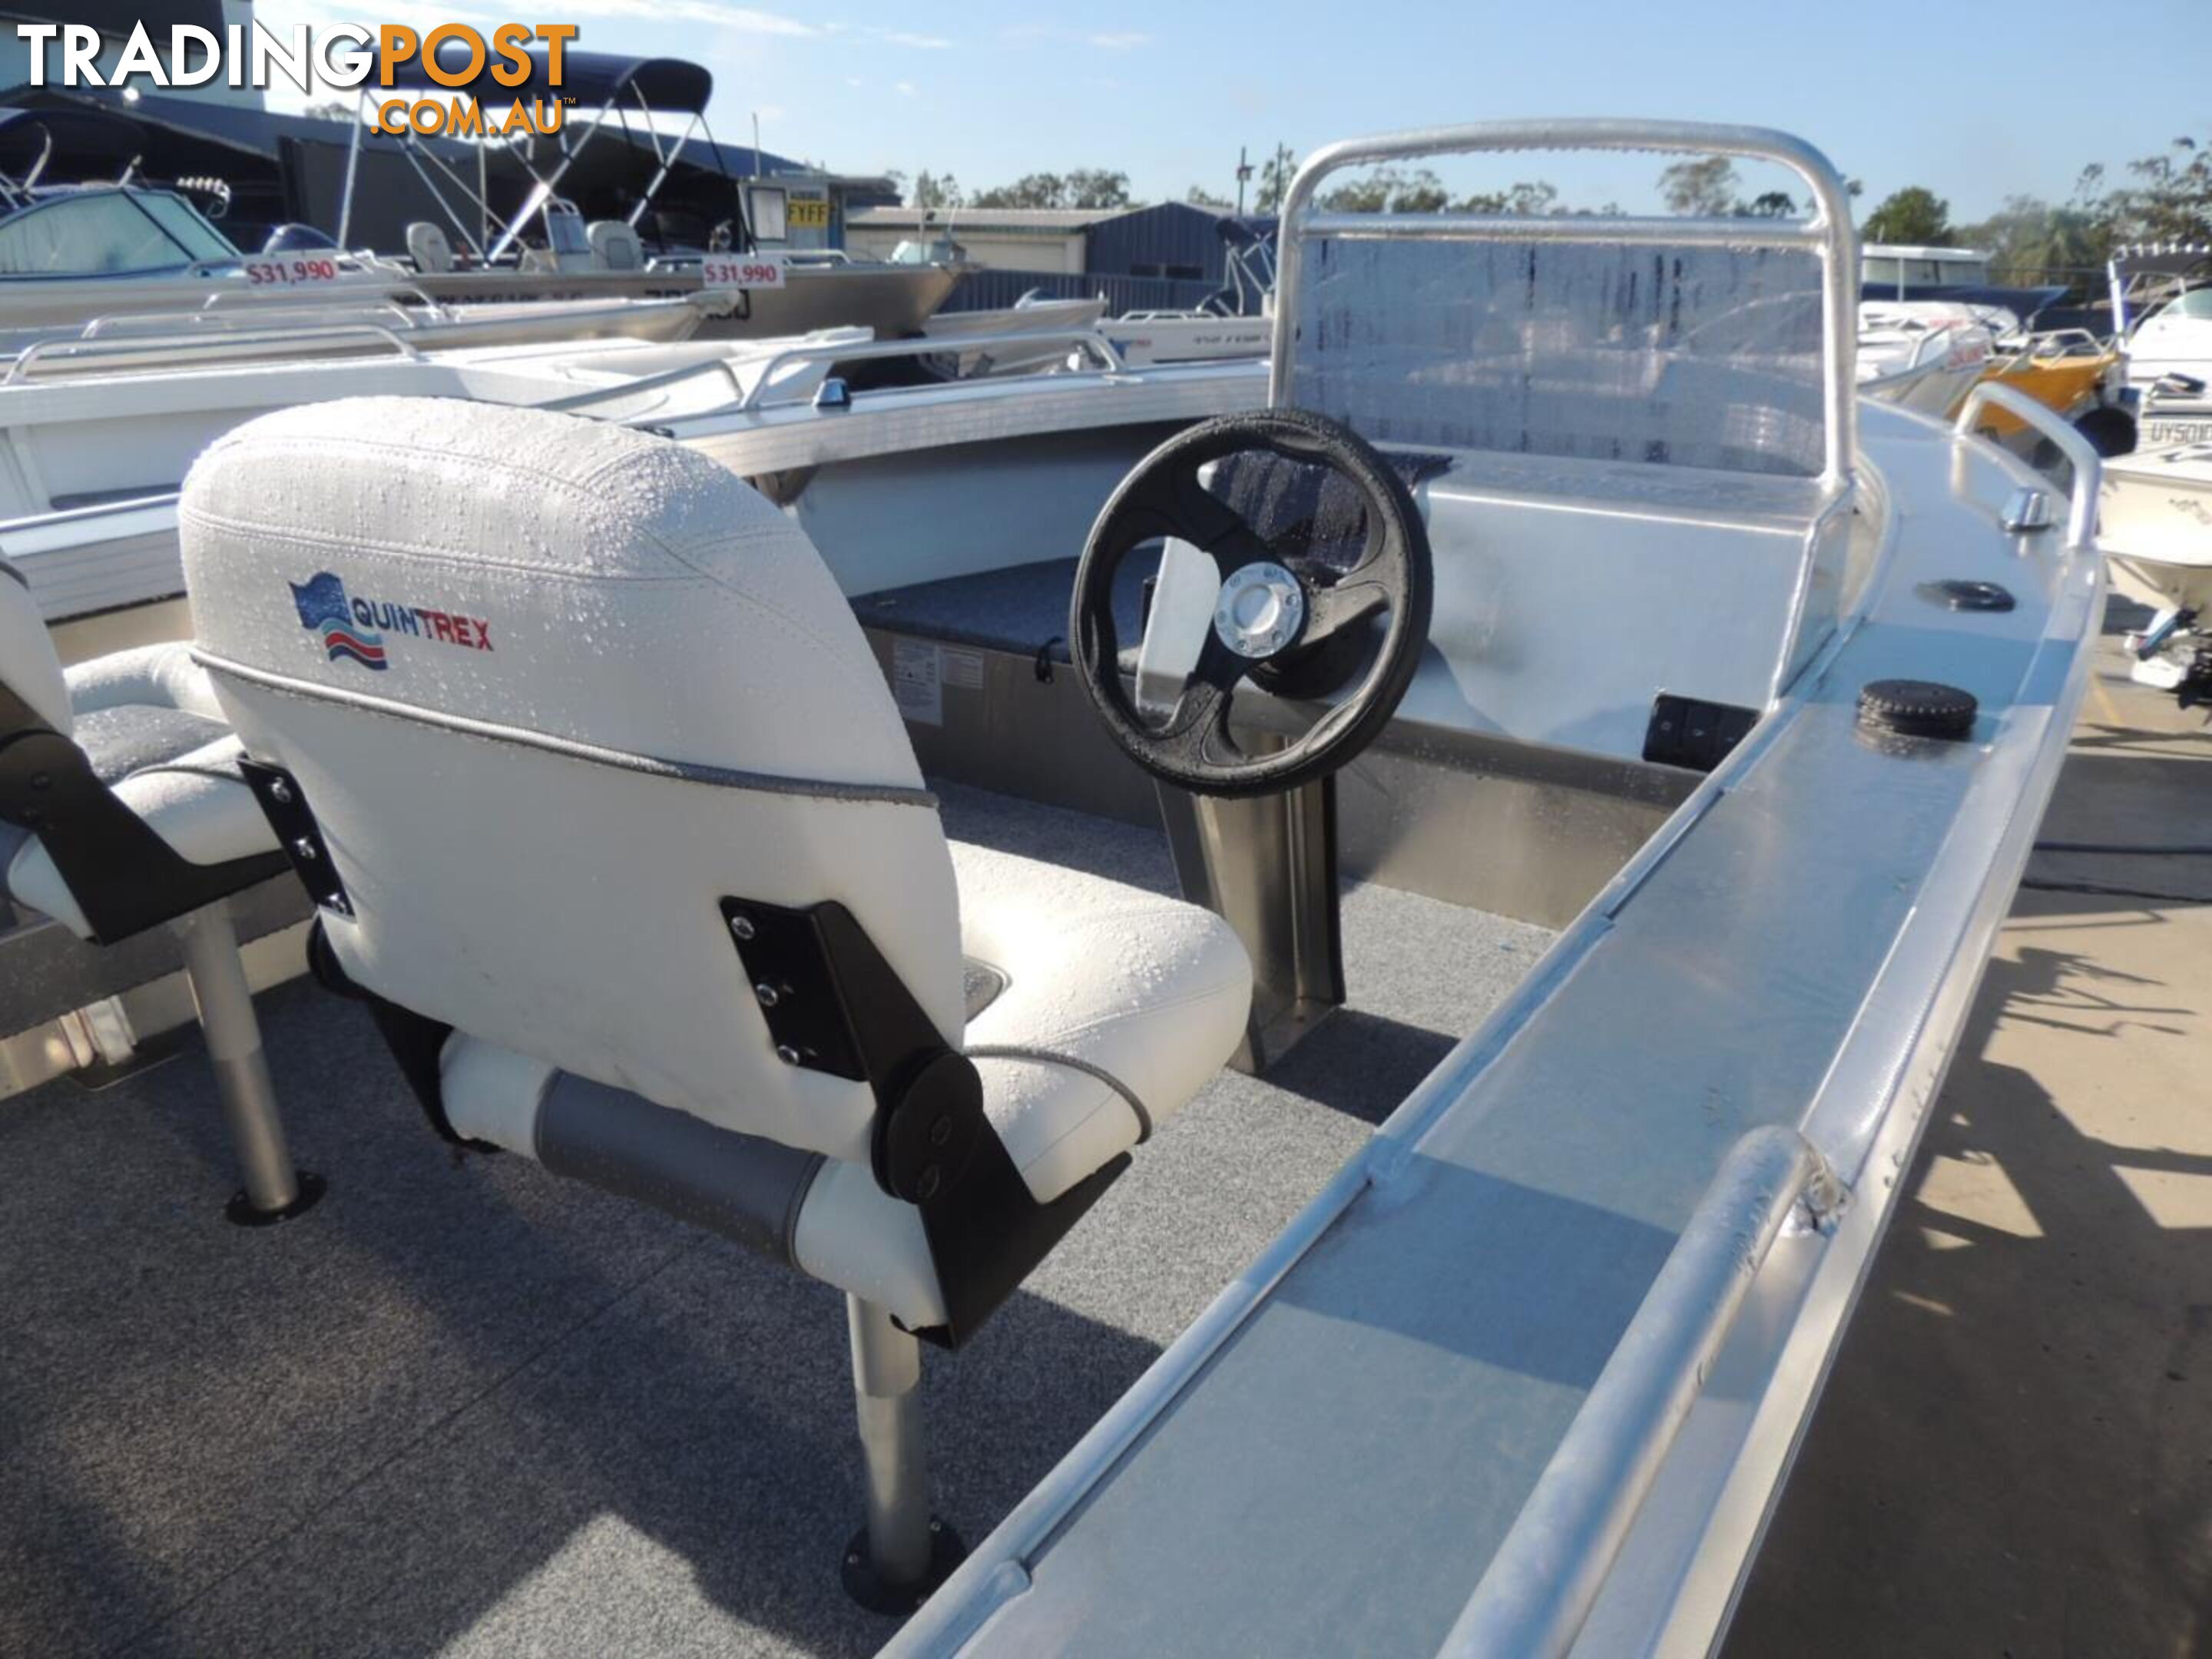 Quintrex 460 Renegade SC(Side Console) + Yamaha F70hp 4-Stroke - Pack 2 for sale online prices